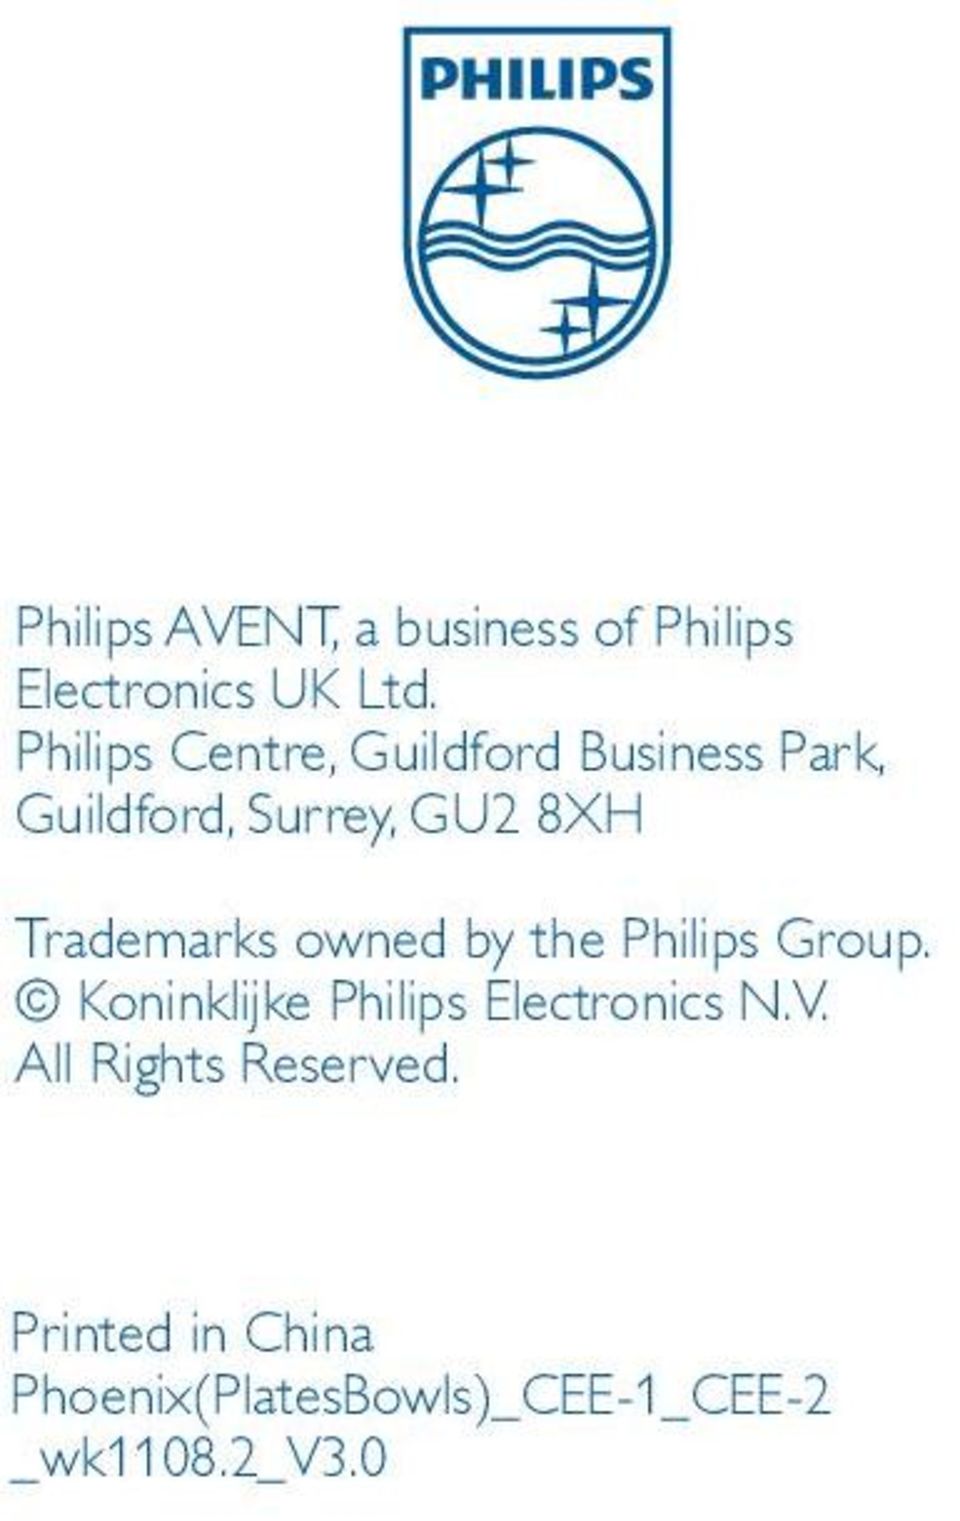 Trademarks owned by the Philips Group.